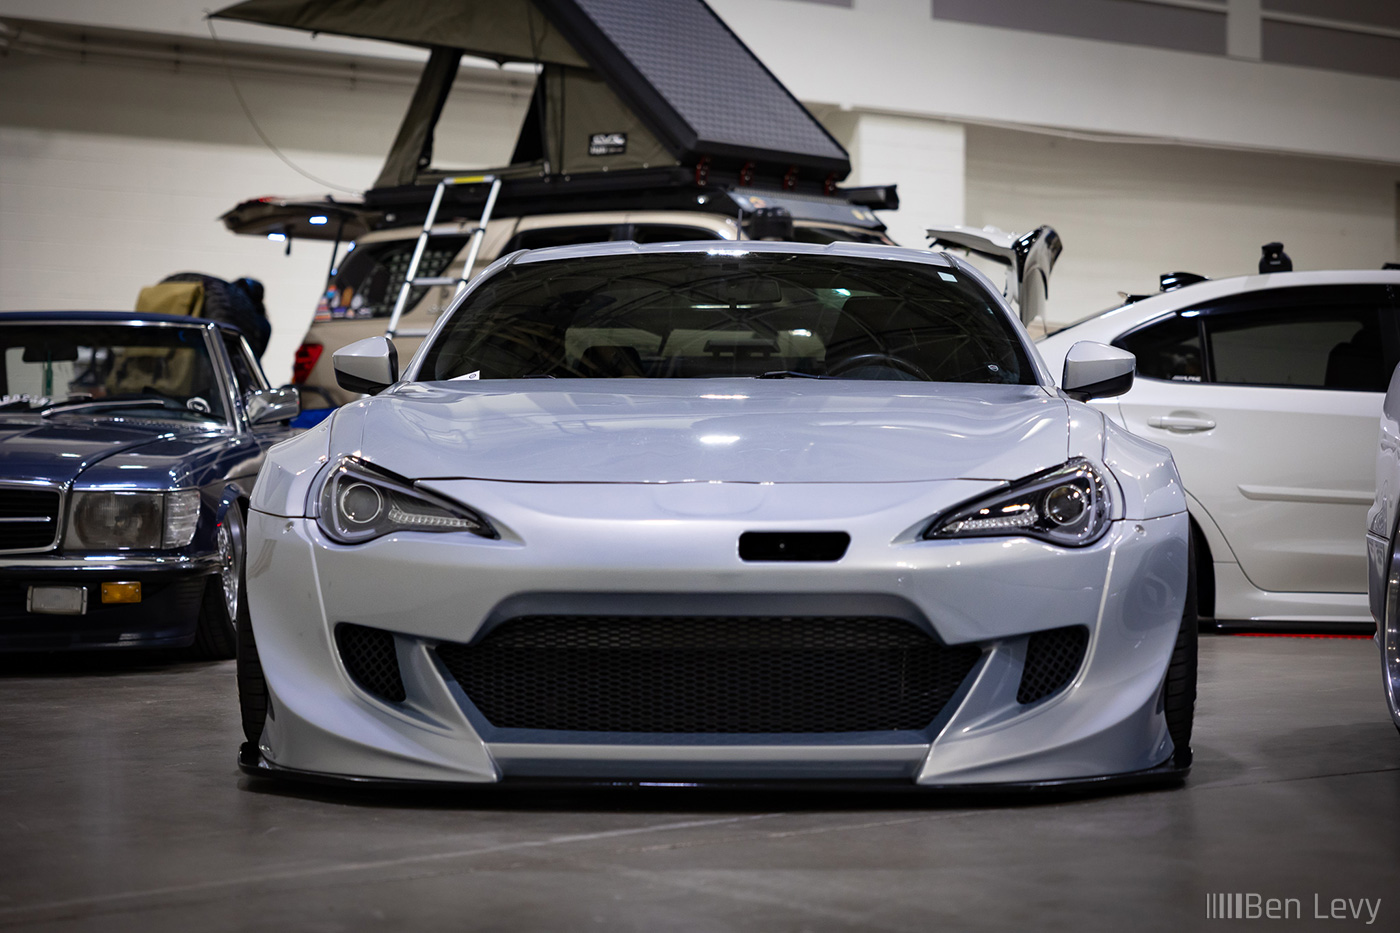 Widebody Scion FR-S at Wekfest Chicago